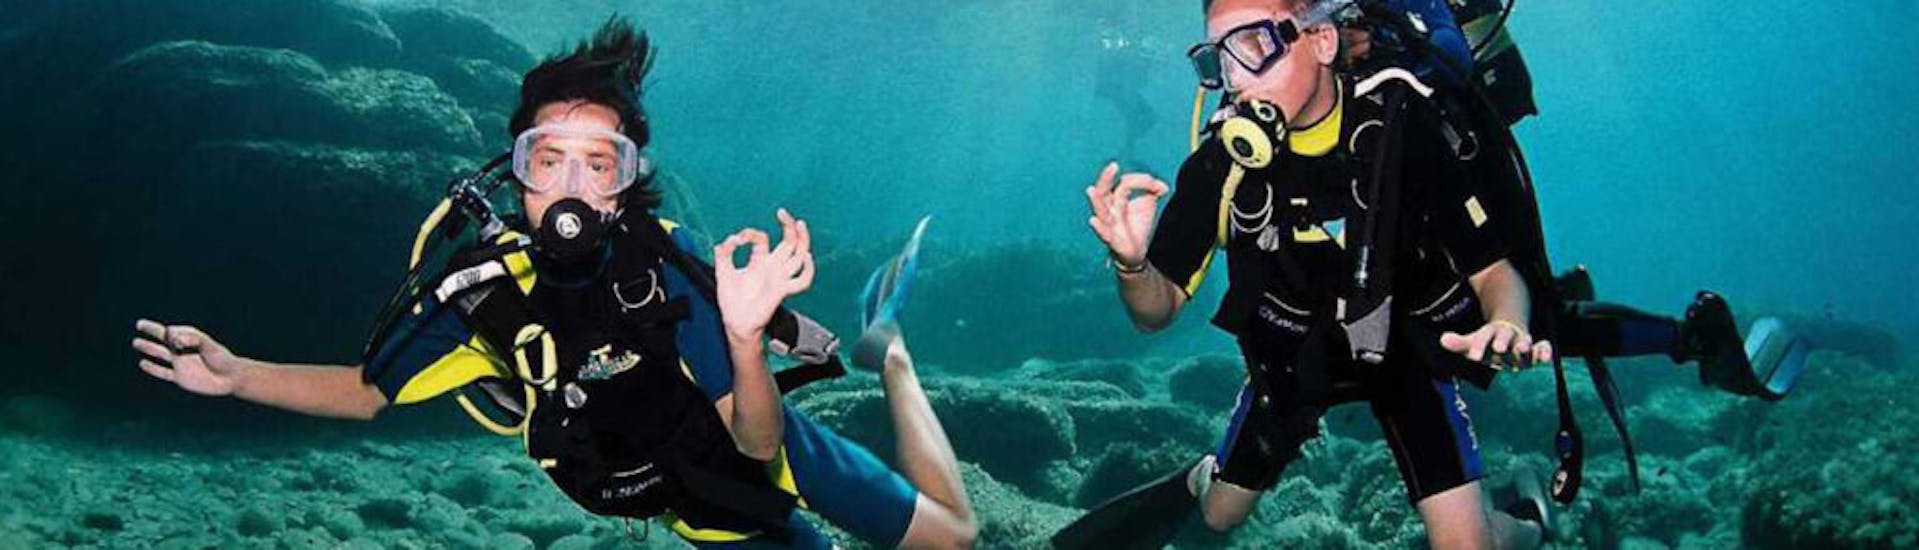 Picture of two divers doing sign language under water during PADI Open Water Diver in Ibiza with Arenal Diving & Boat Trips Ibiza.